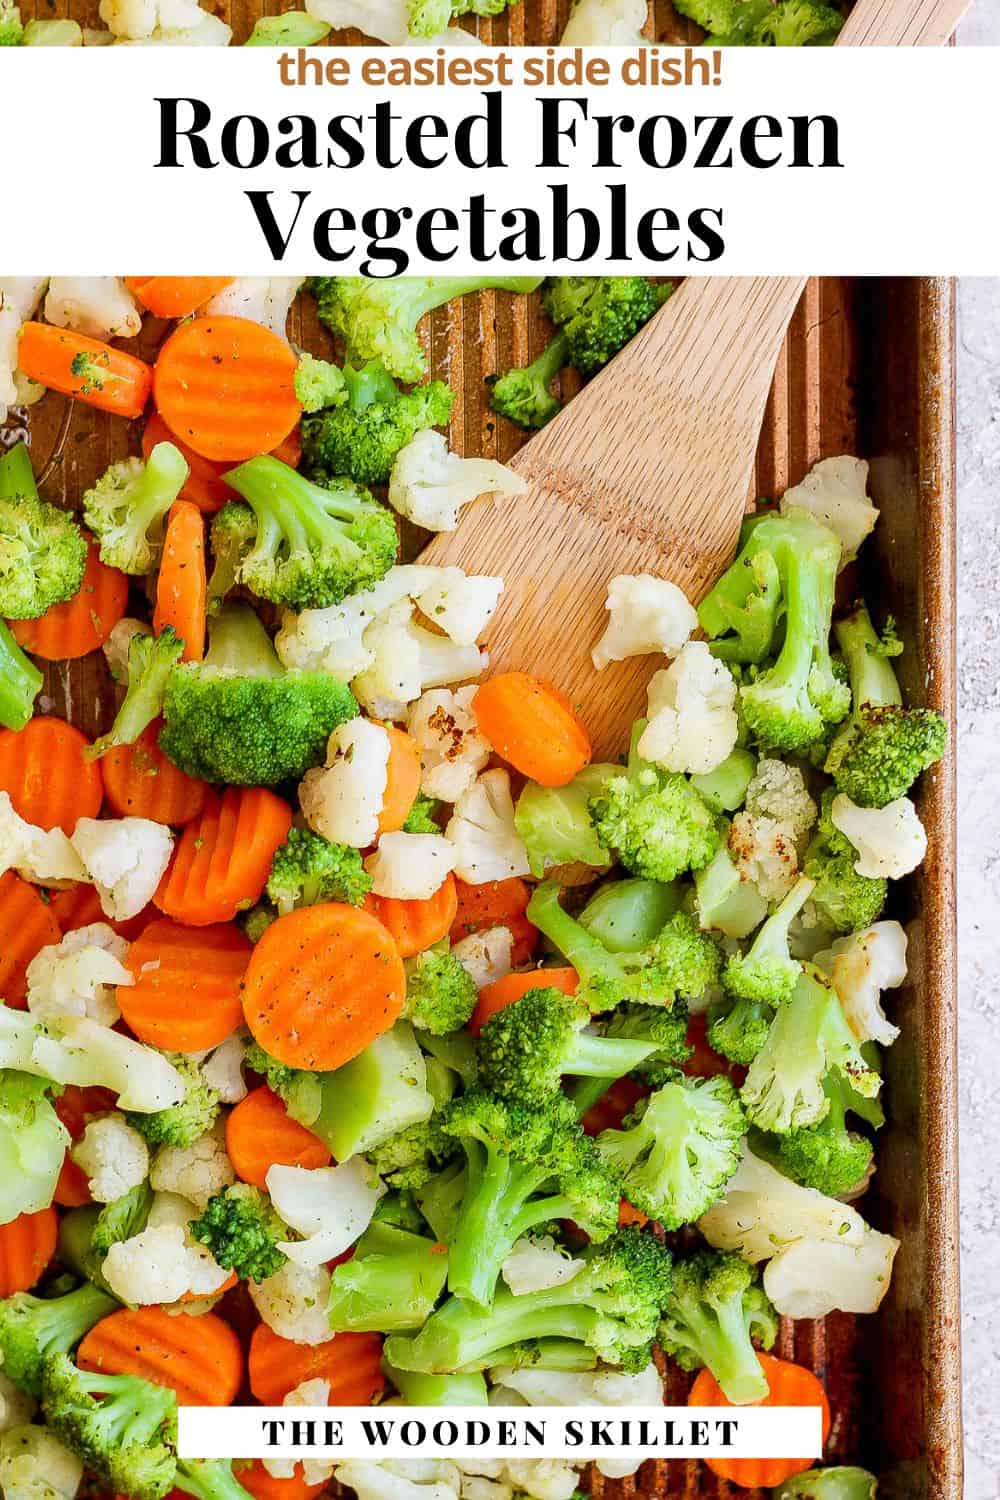 Pinterest image showing roasted veggies with the title "roasted frozen vegetables. The easiest side dish."